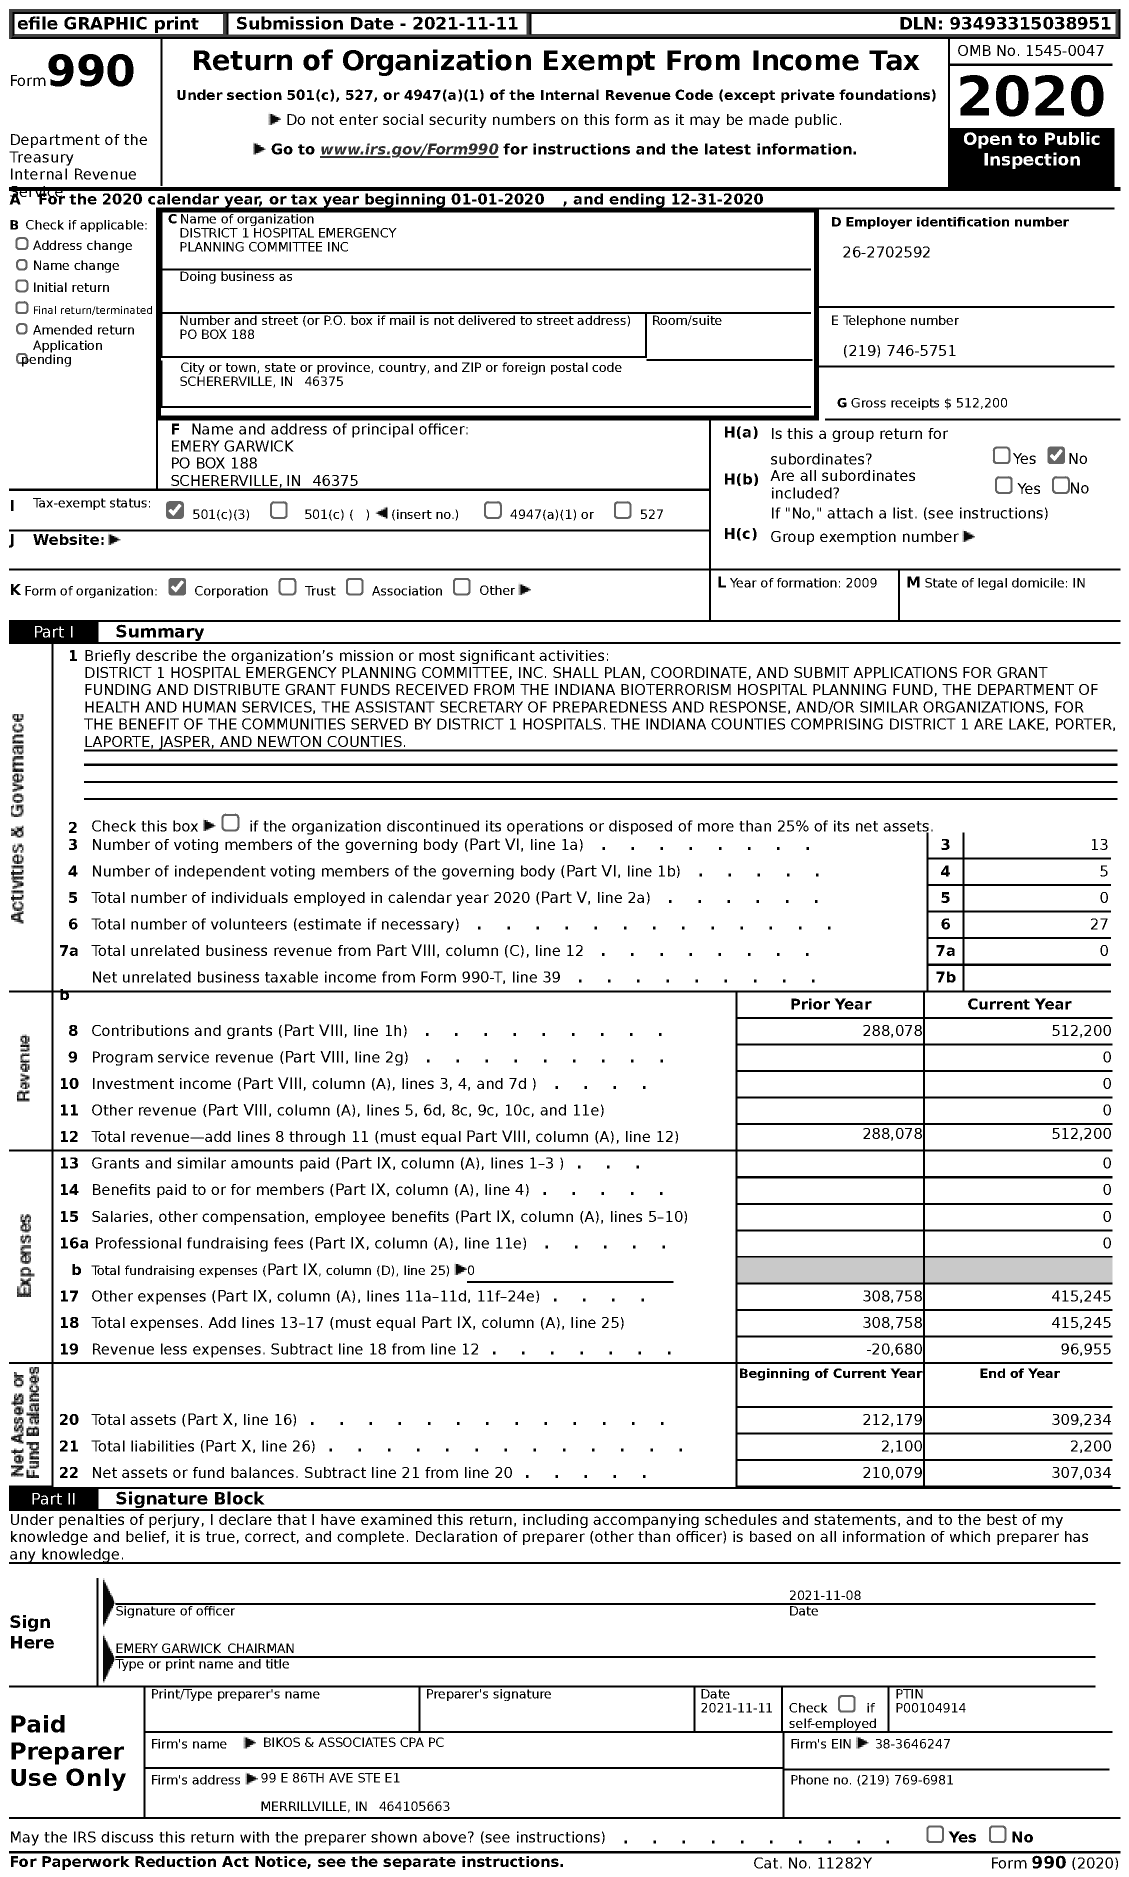 Image of first page of 2020 Form 990 for District 1 Hospital Emergency Planning Committee